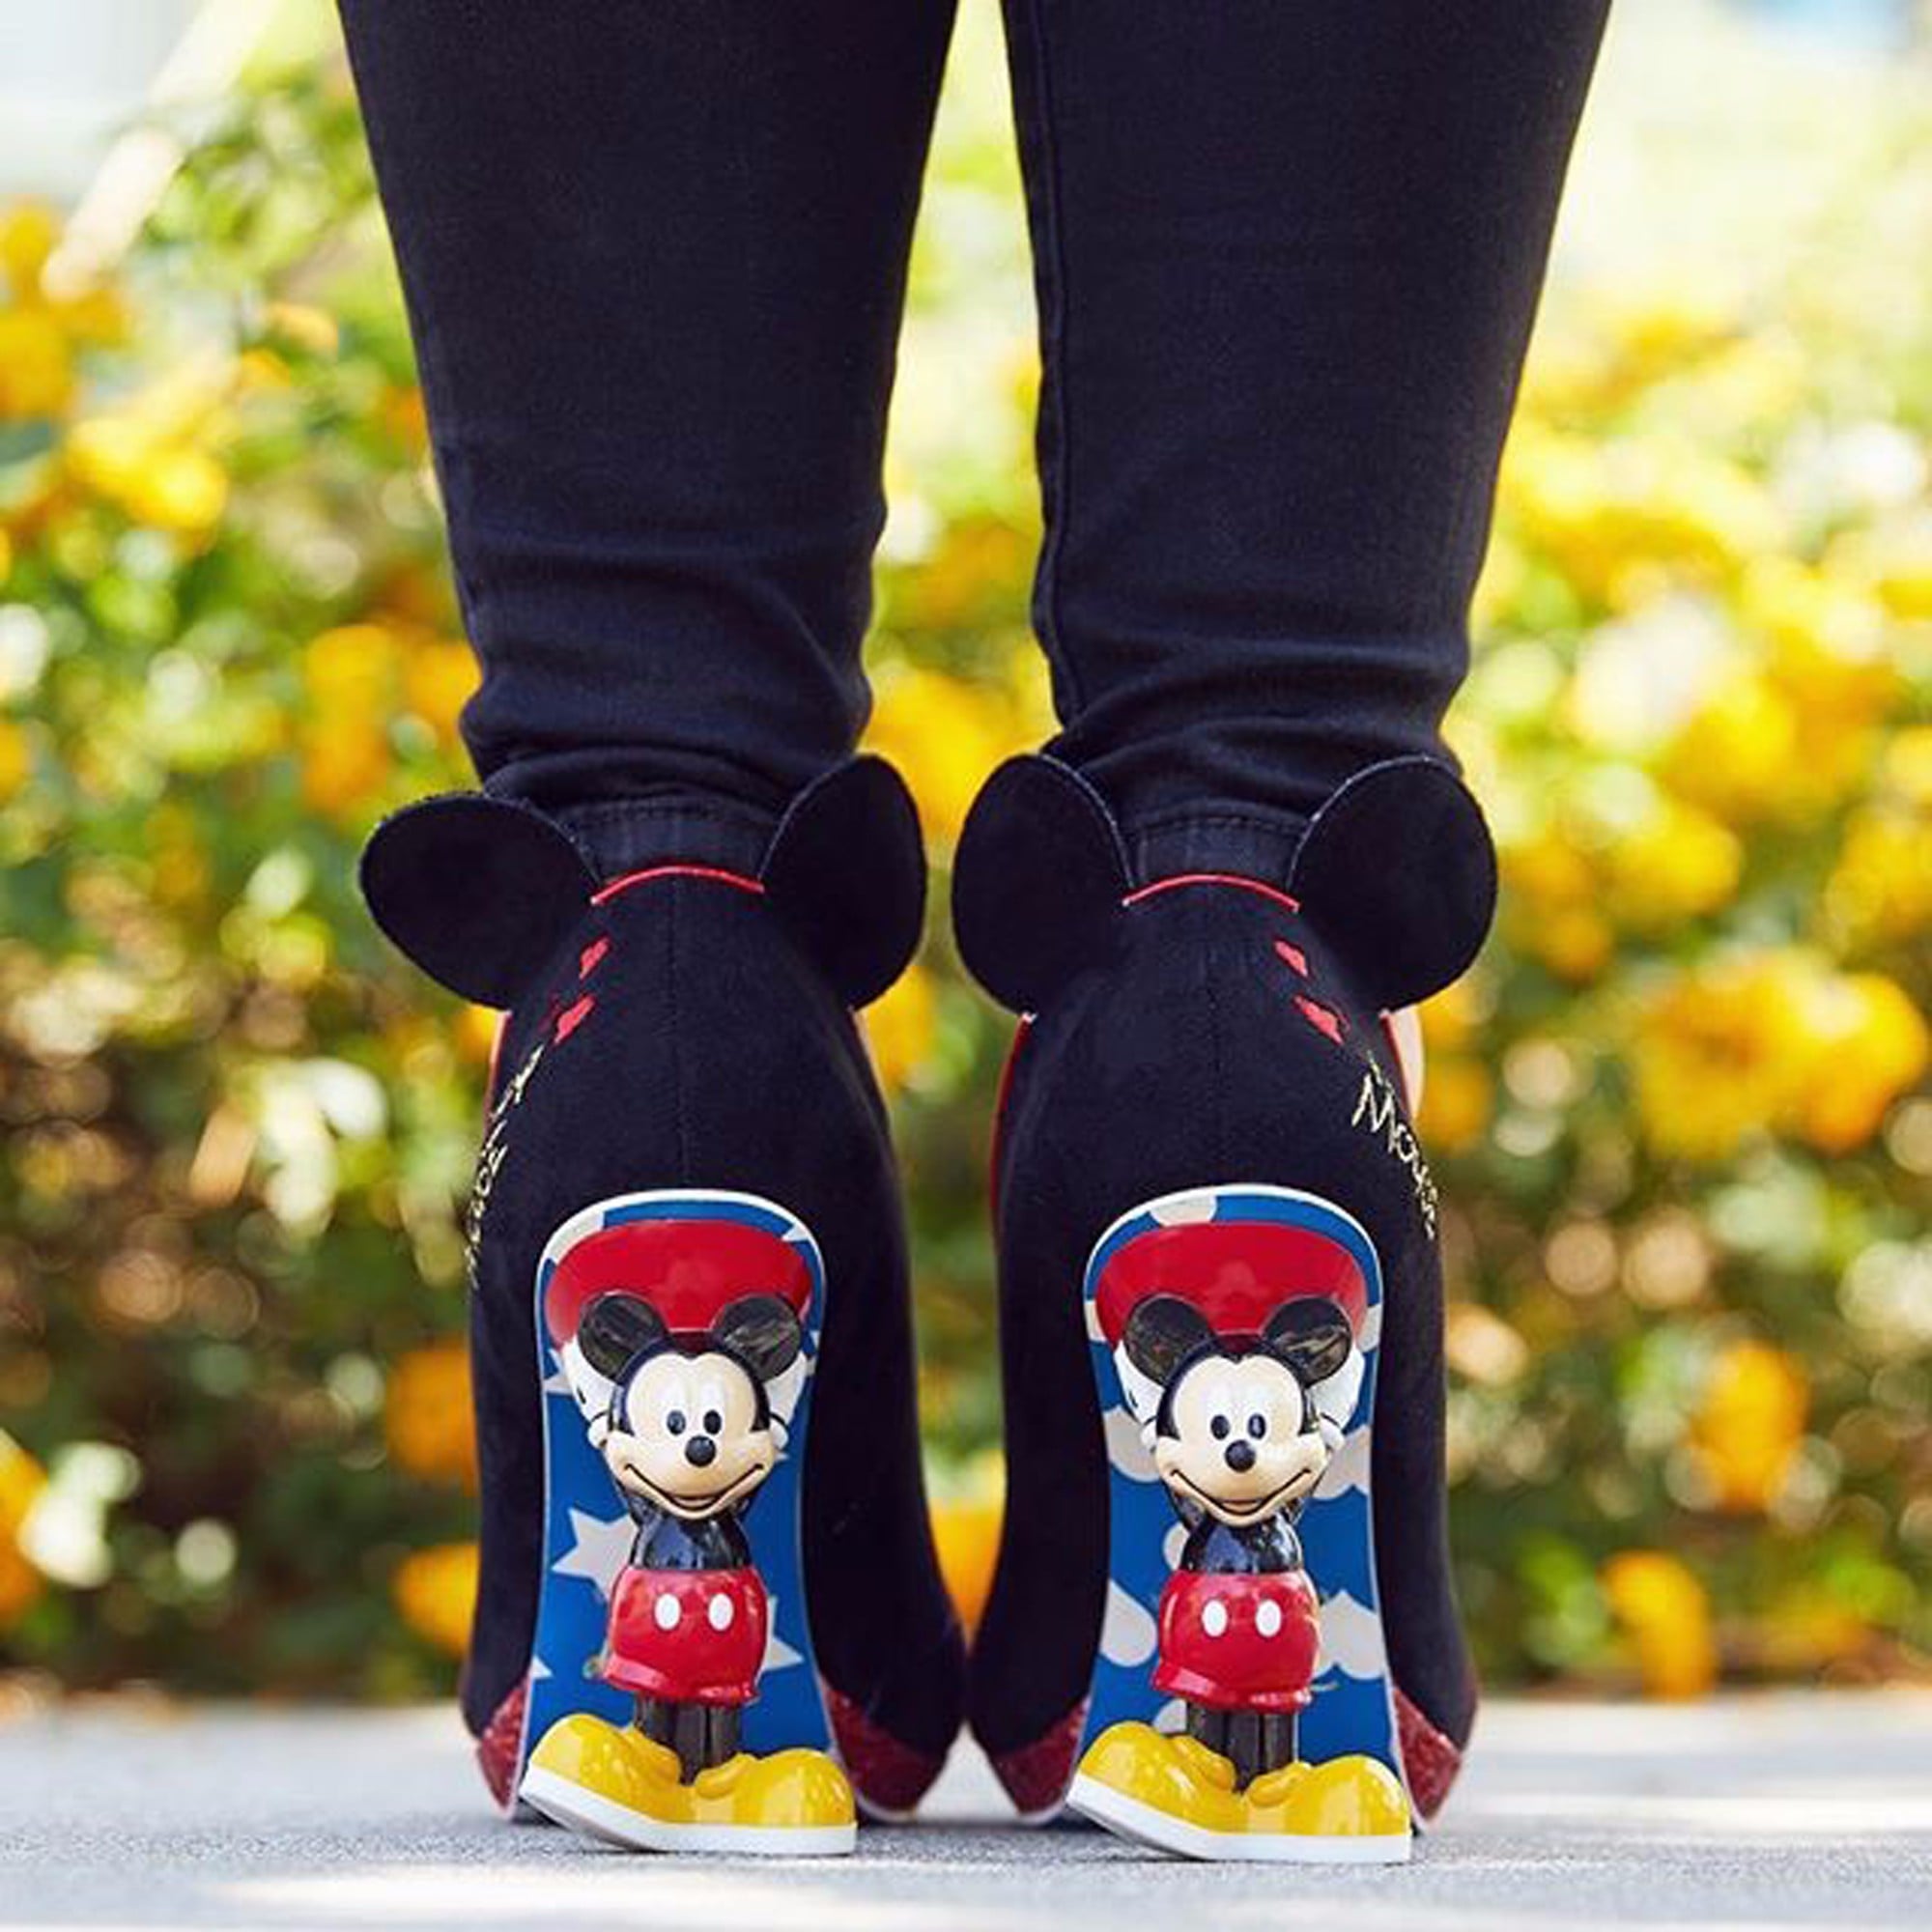 mickey mouse high heels